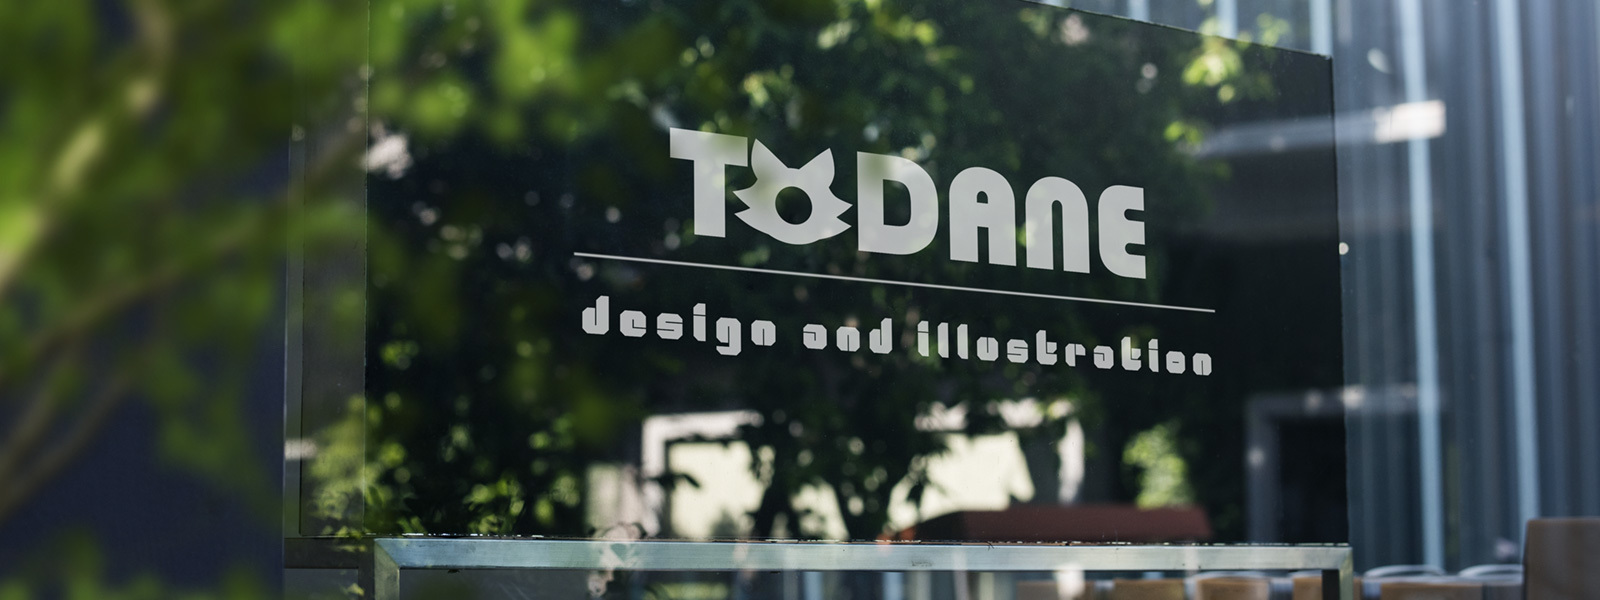 TODANEe's BOOTH shop